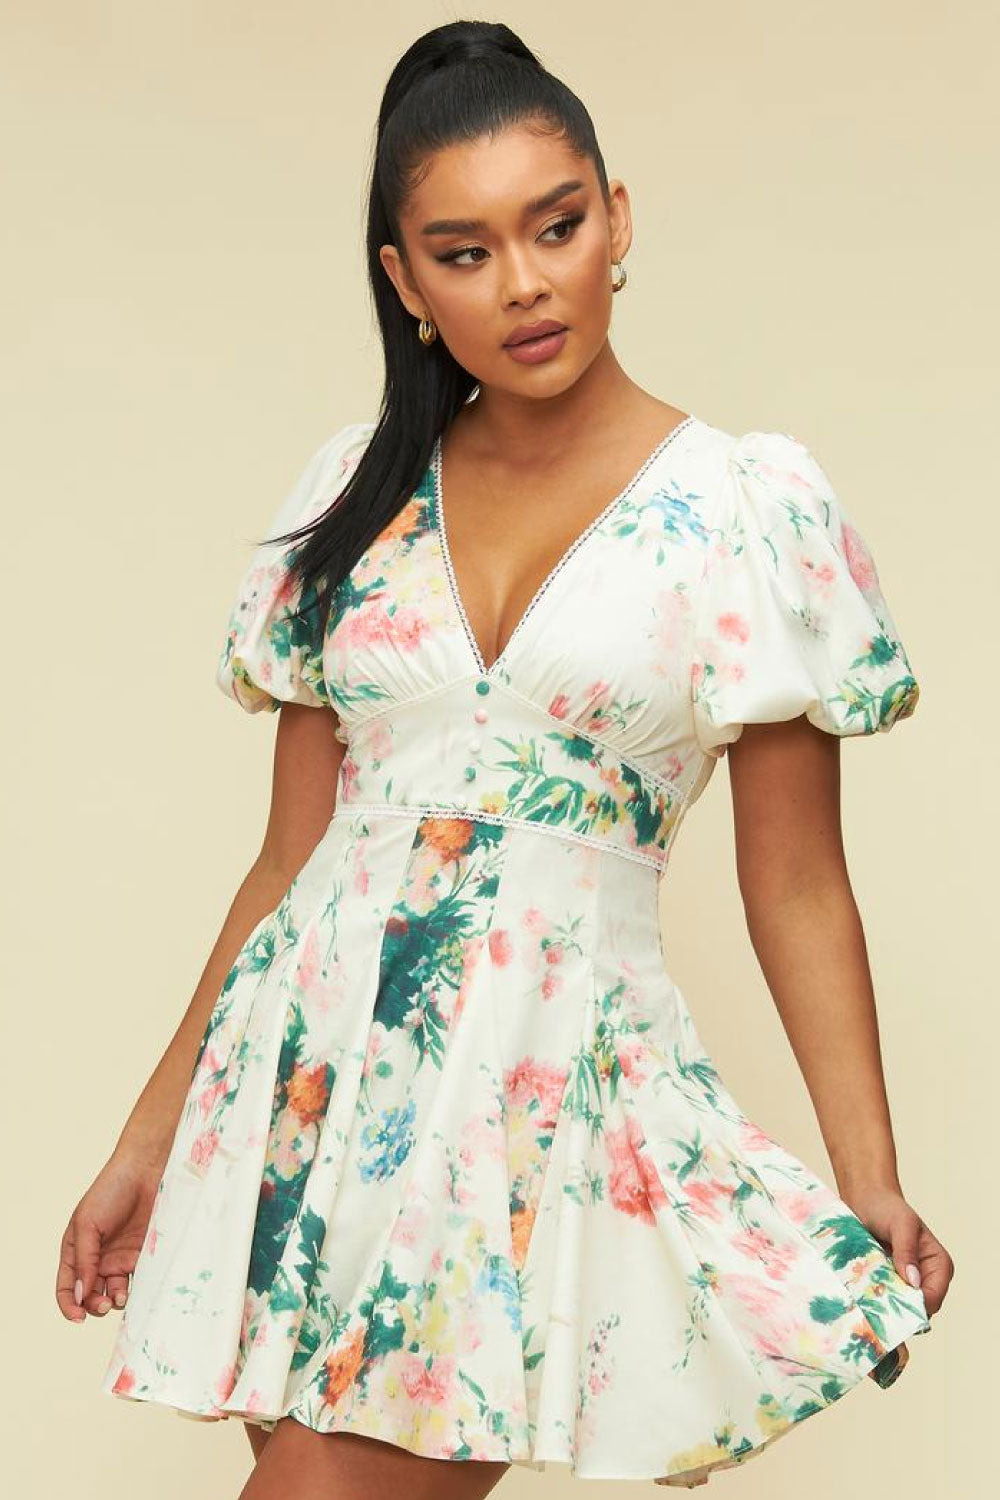 Image of the front of the Spring Dream Dress on a model.